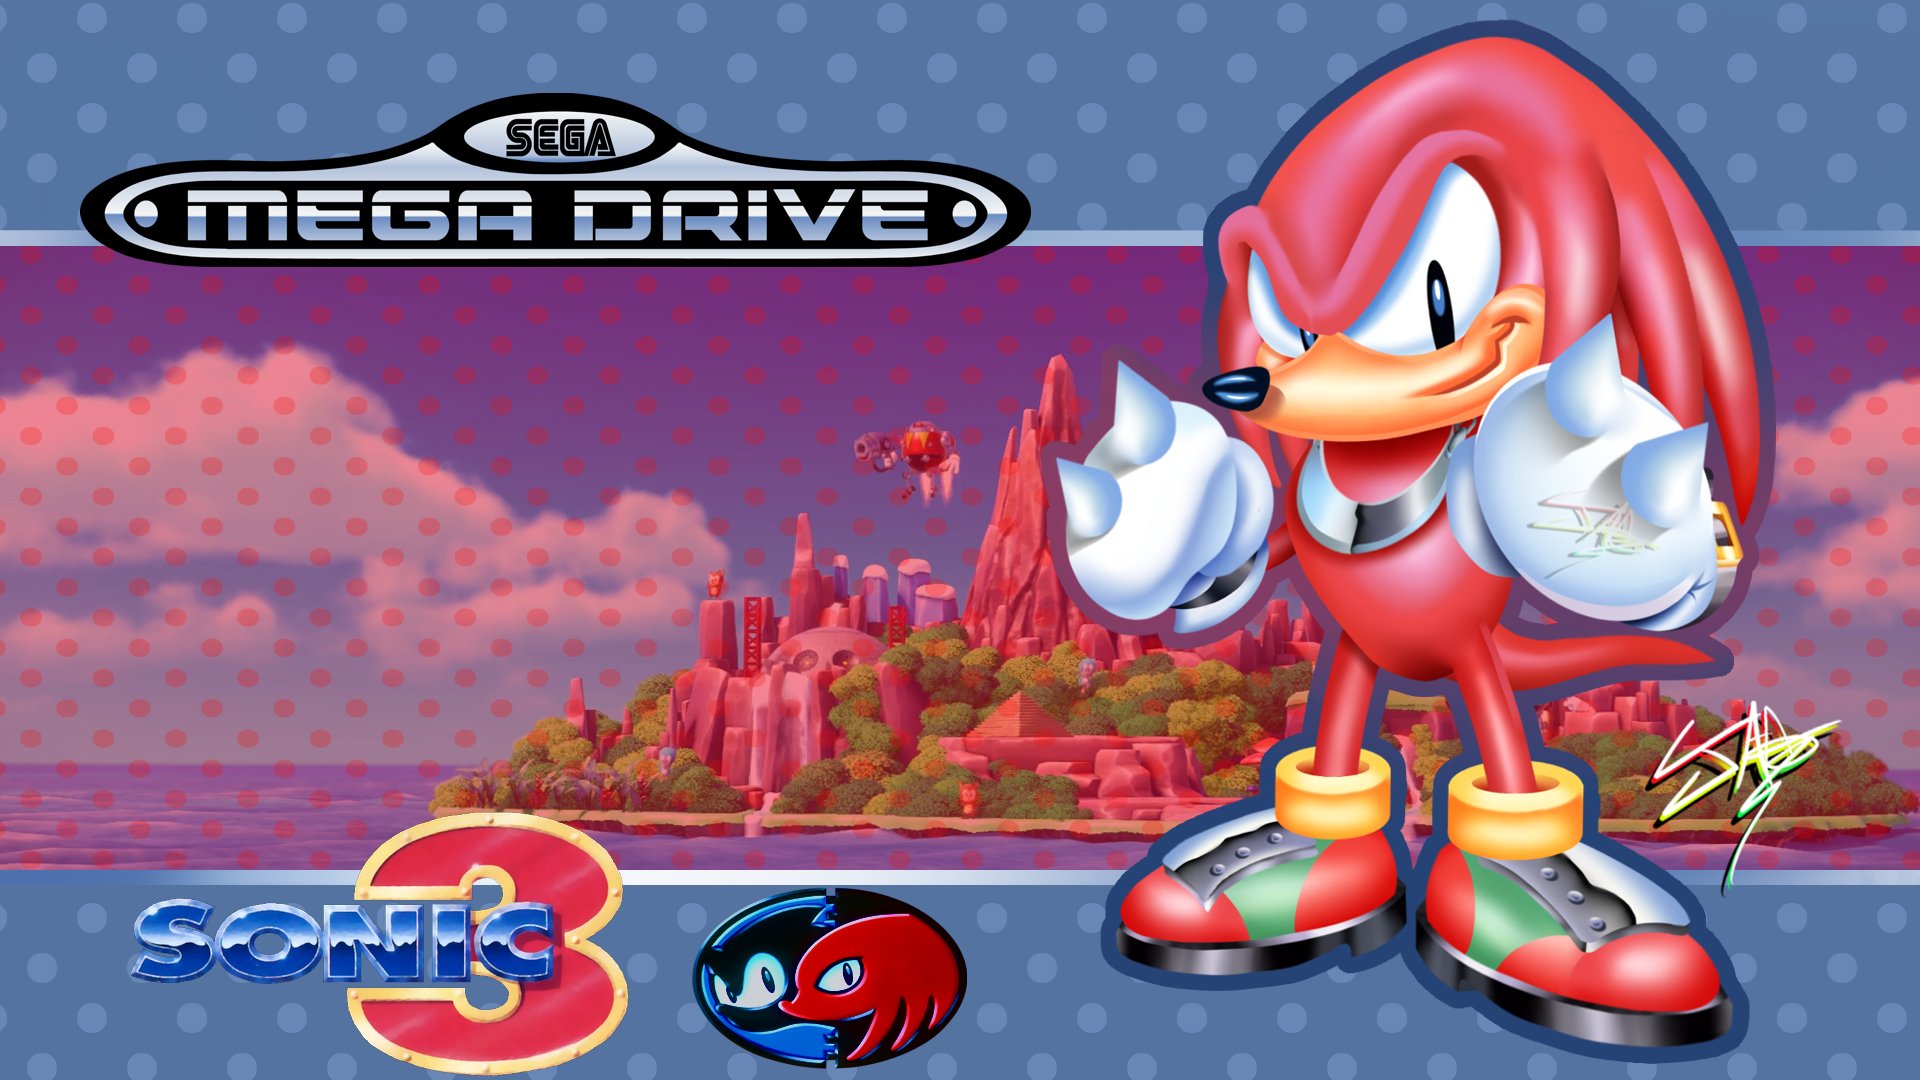 Knuckles the Echidna in Sonic the Hedgehog 2 (Genesis/Mega Drive